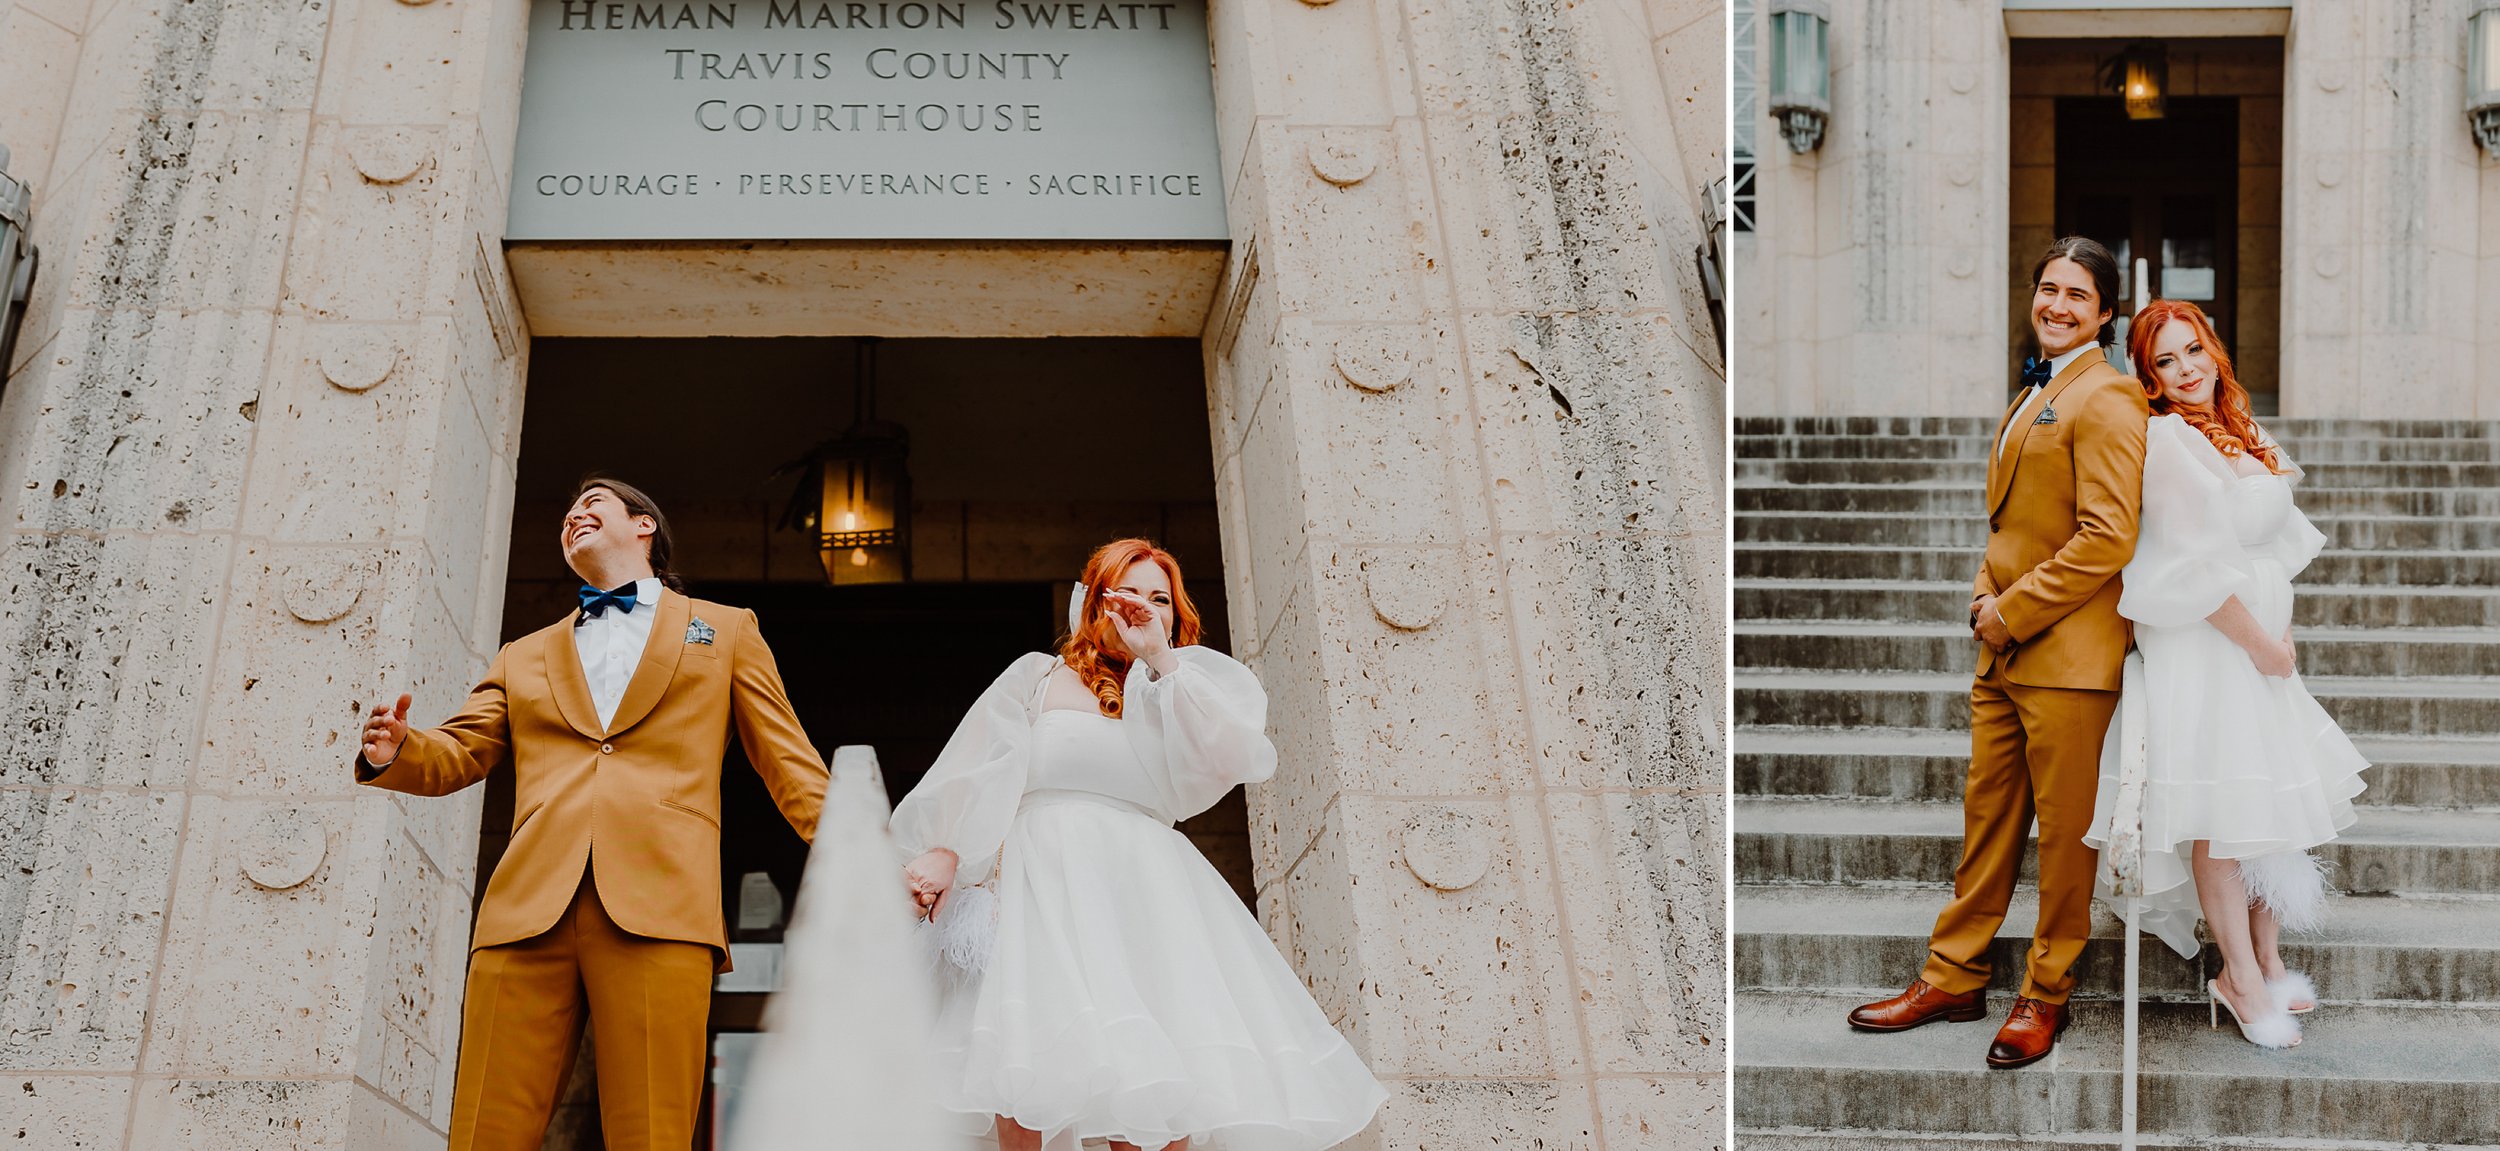 bride and groom on courthouse steps